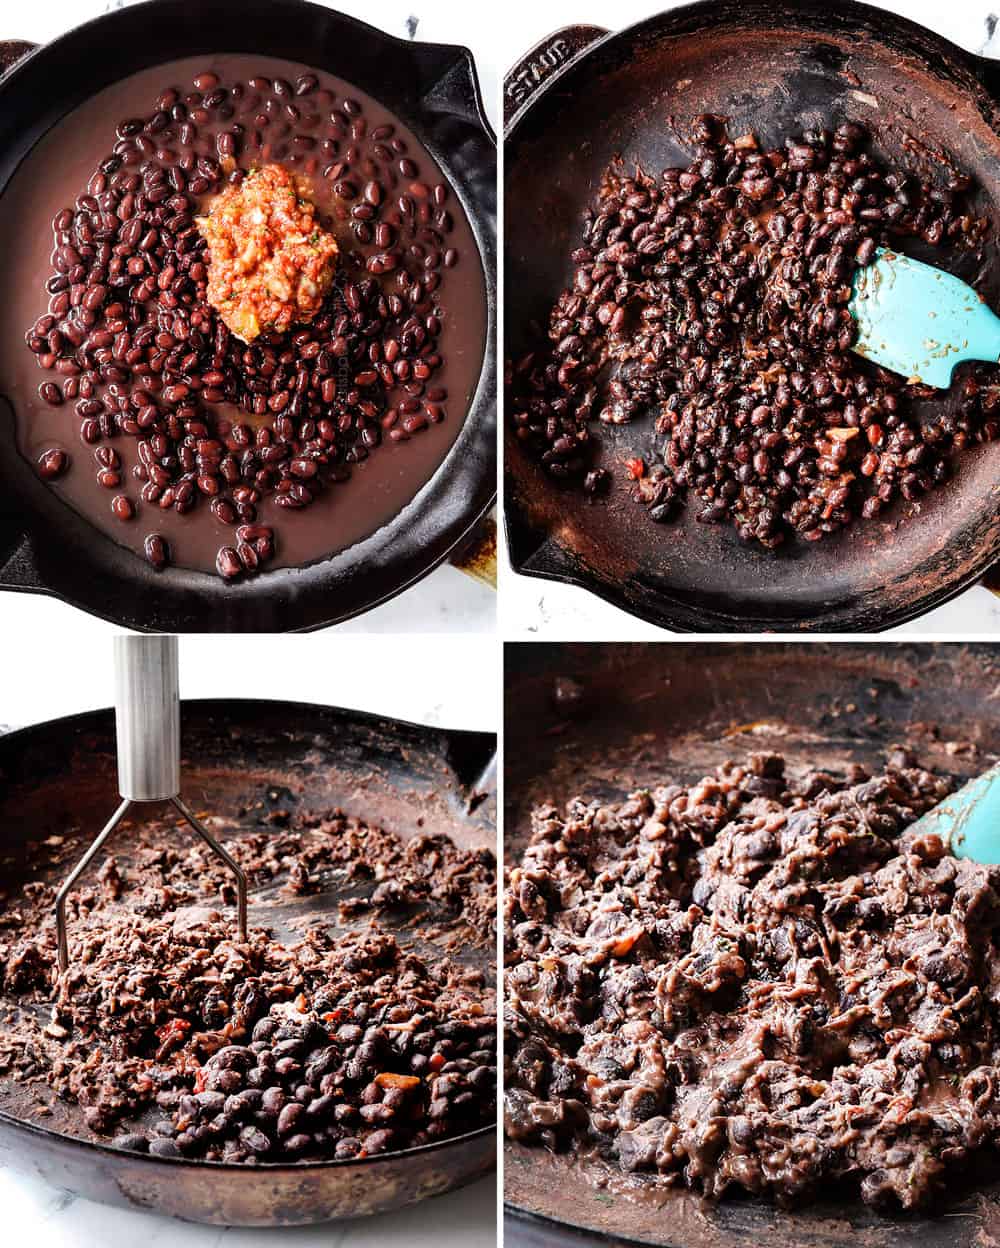 a collage showing how to make huevos ranvheros by 1) adding beans and salsa to a skillet, 2) simmering until beans are soft and liquid reduced, 3) mashing the beans 4) showing the creamy consistency